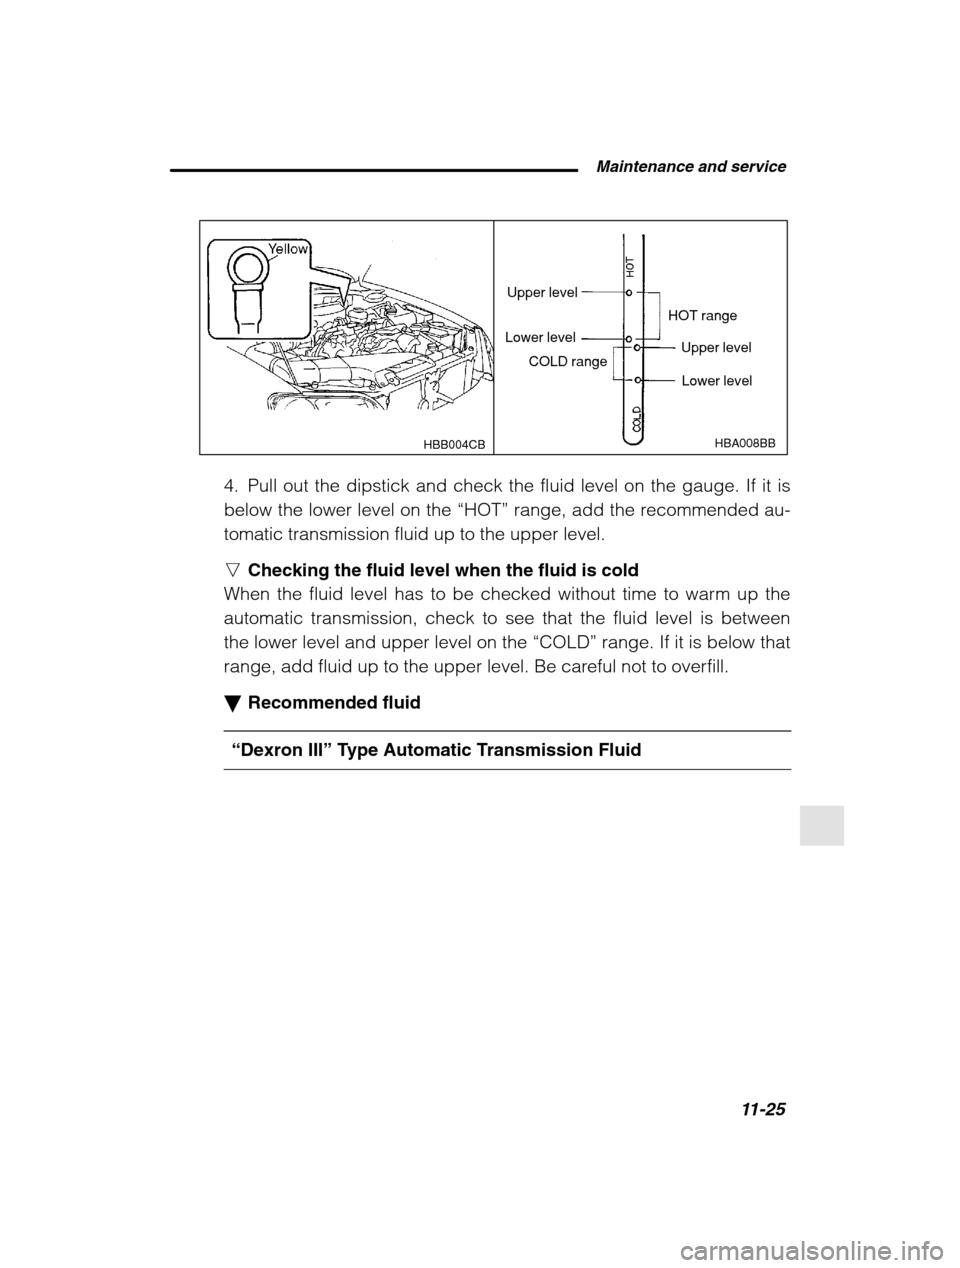 SUBARU FORESTER 2002 SG / 2.G Owners Manual  Maintenance and service11-25
–
 CONTINUED  –
HBA008BB
Upper level
Lower level Upper level
Lower level
HOT range
COLD range
HBB004CB
4. Pull out the dipstick and check the fluid level on the gauge